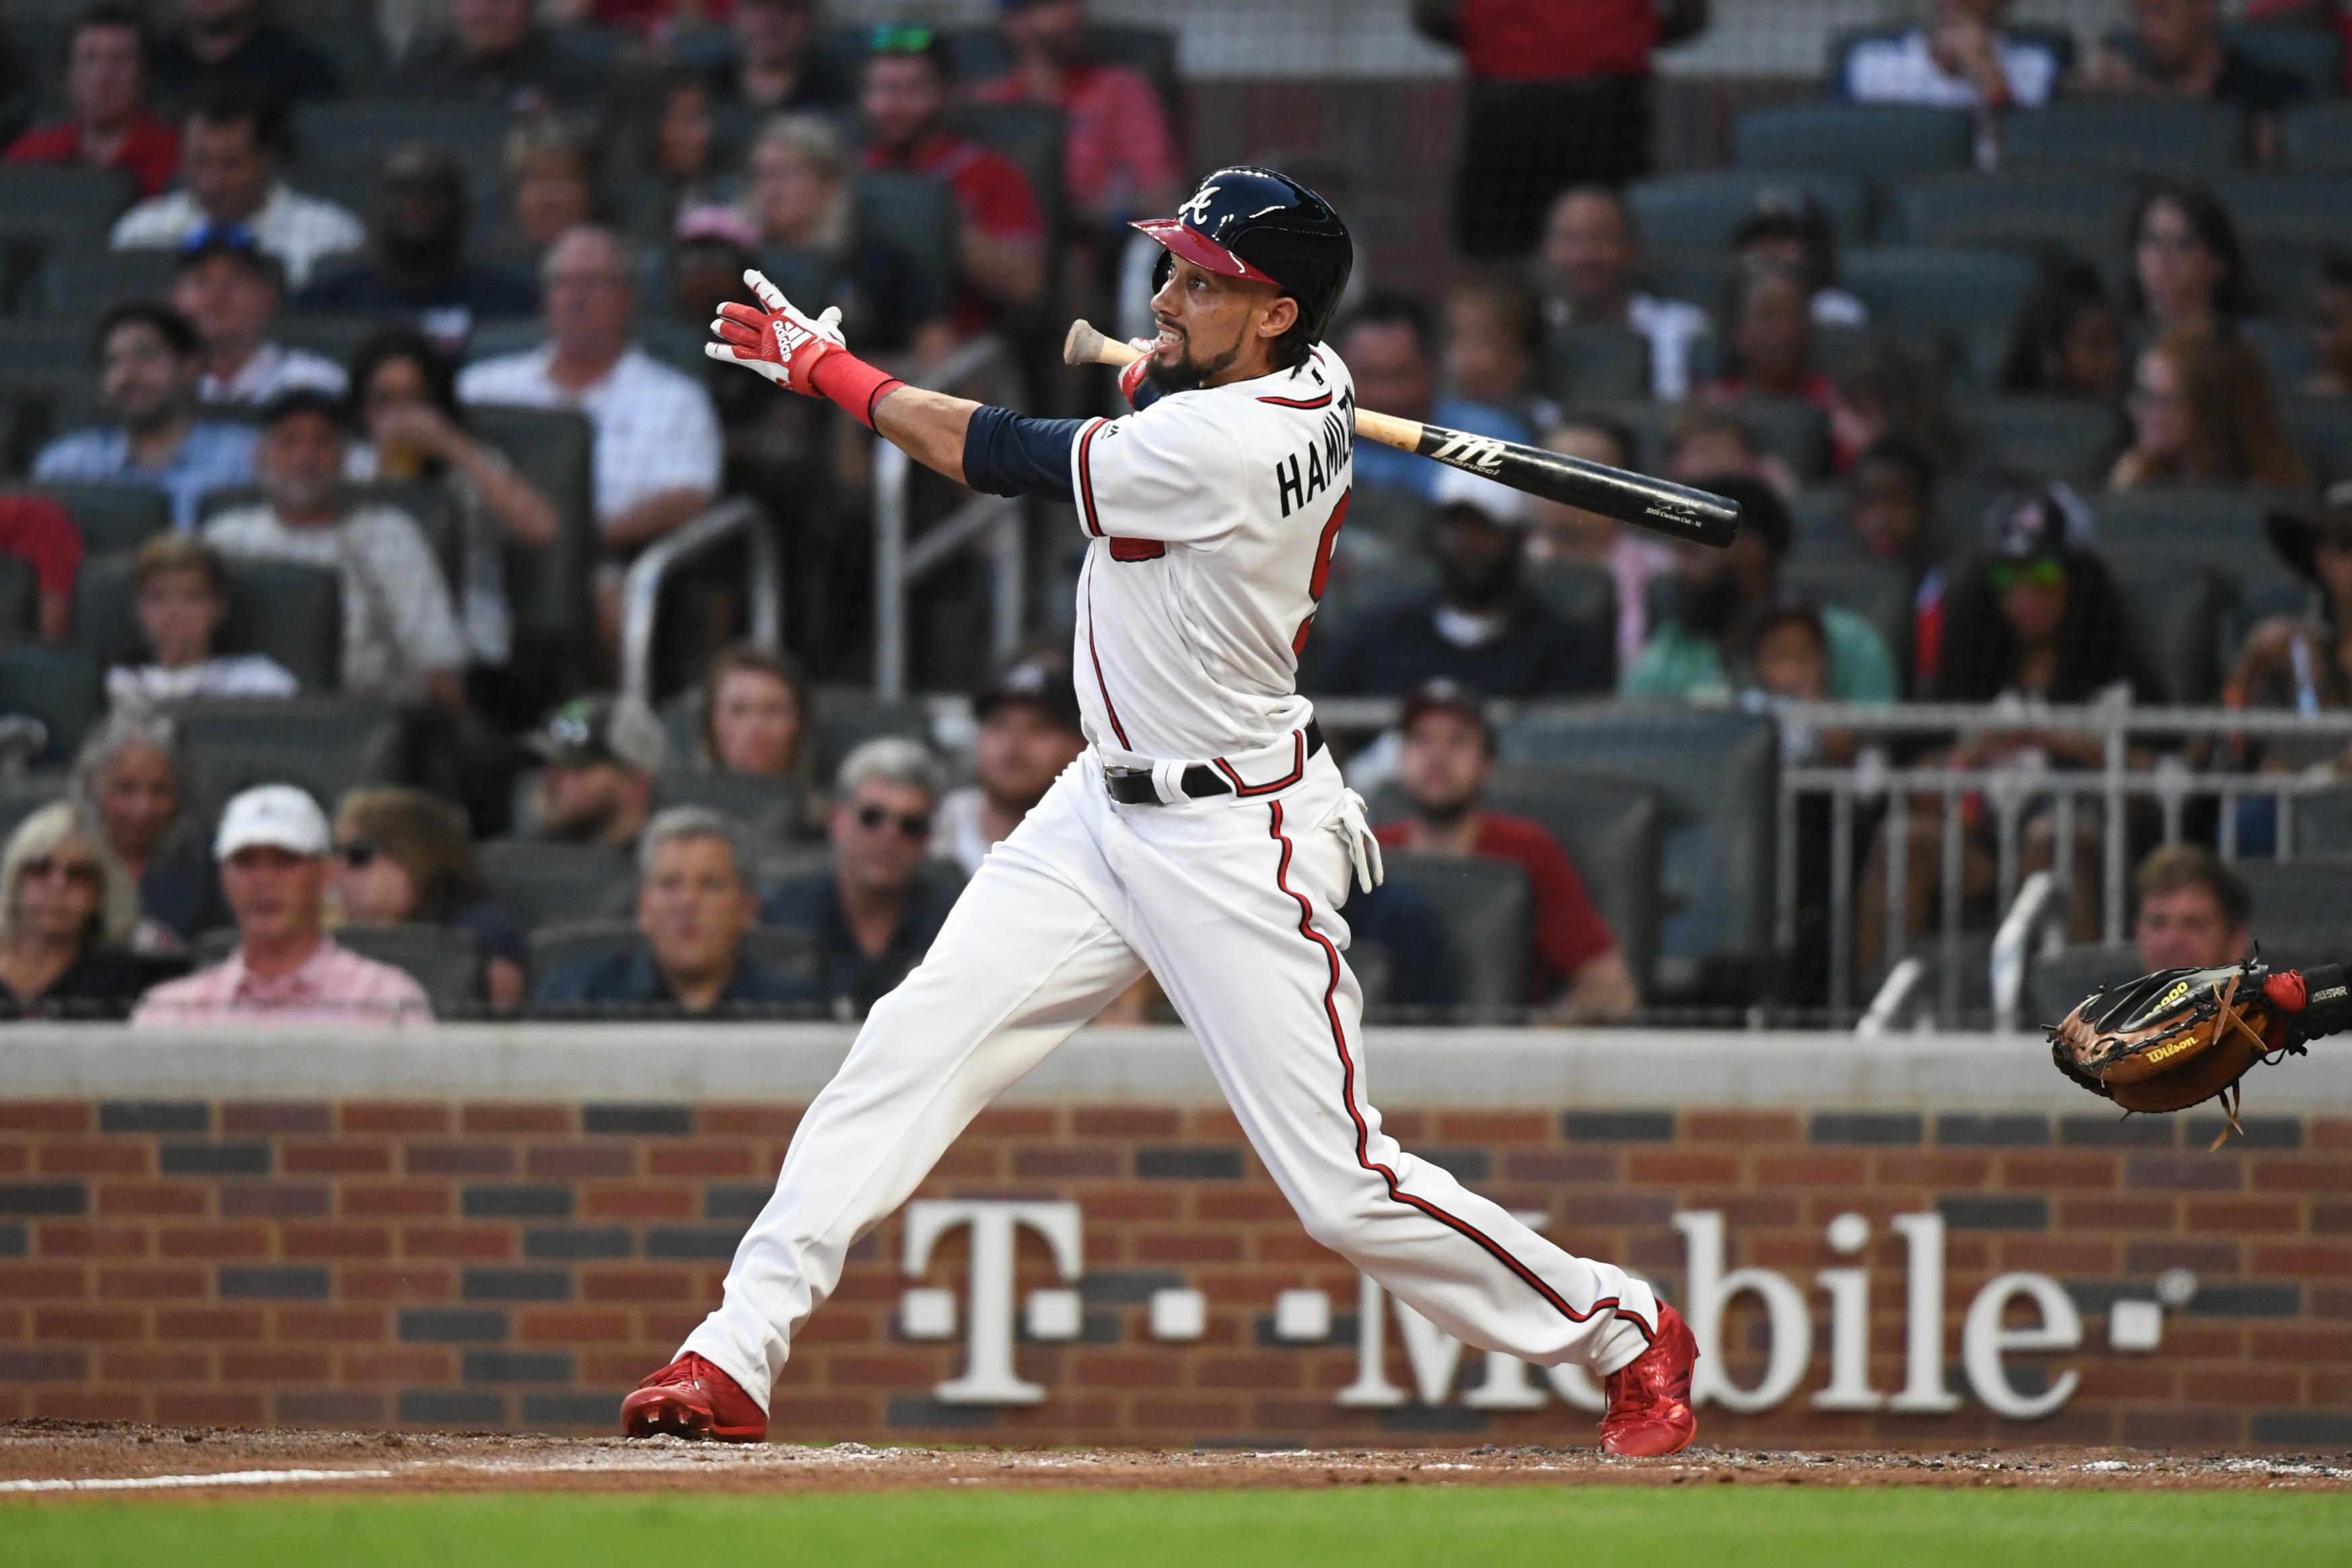 Billy Hamilton swings at a pitch / USA TODAY